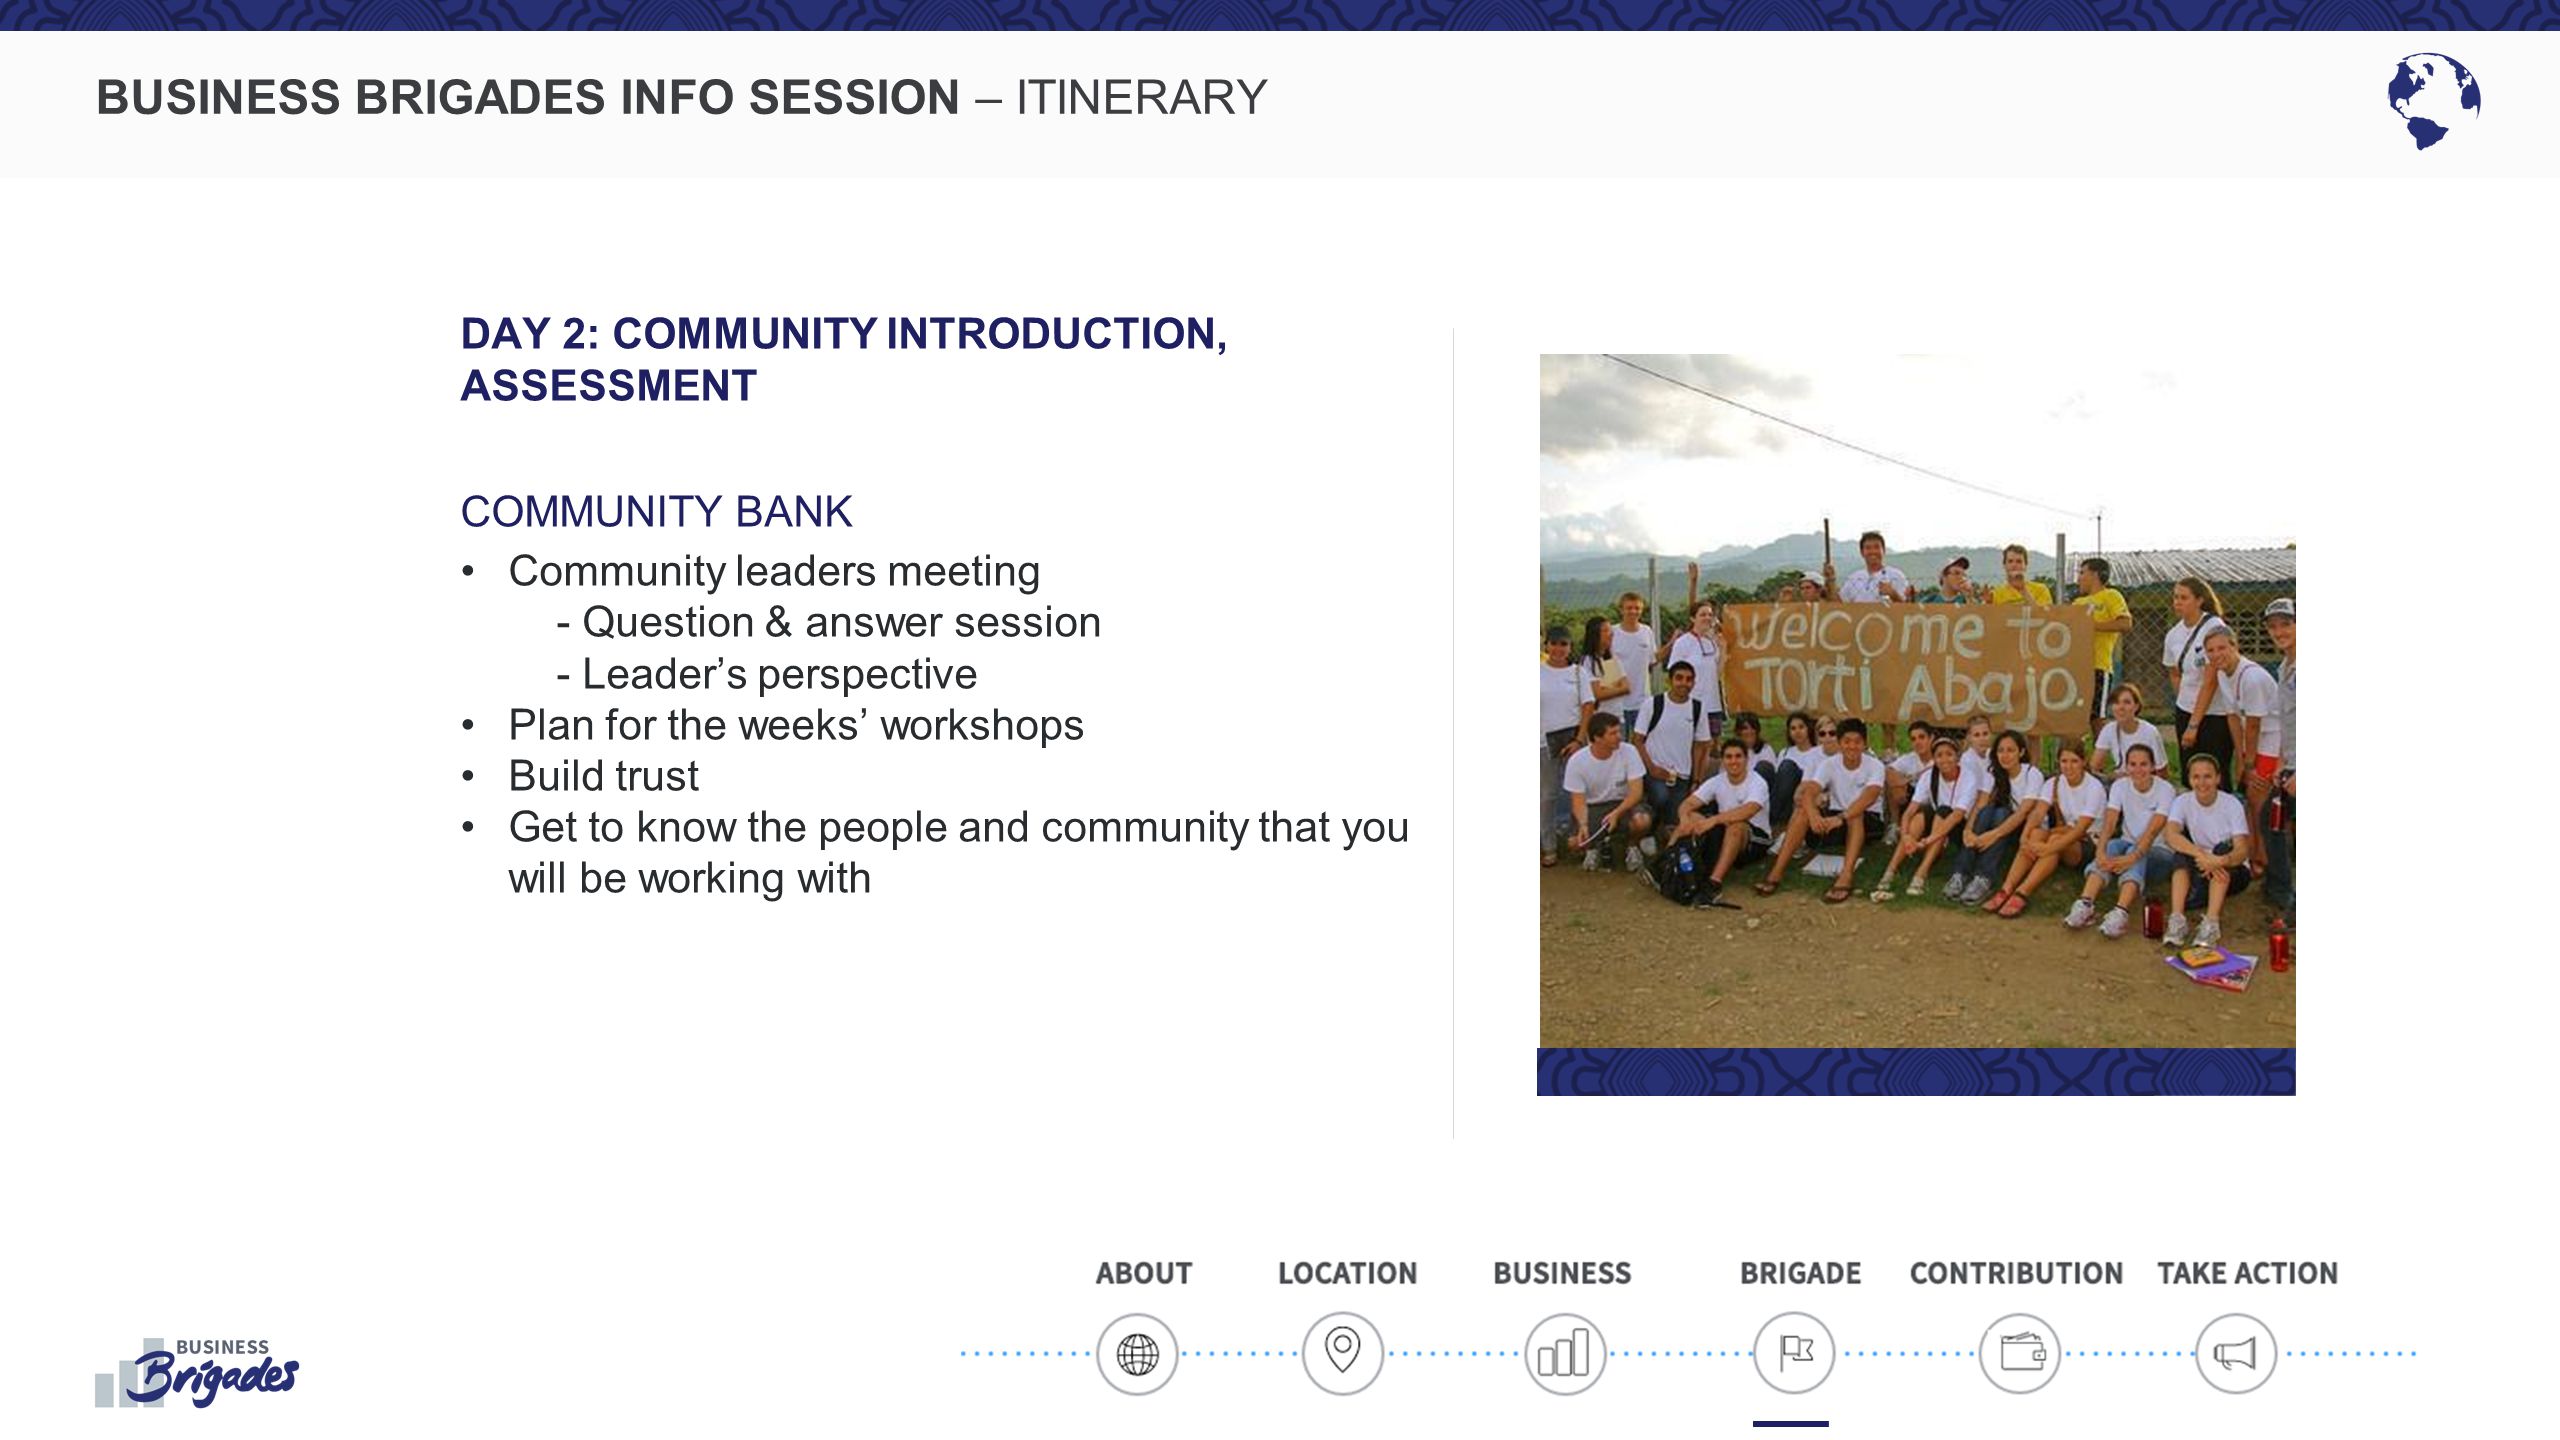 BUSINESS BRIGADES INFO SESSION – ITINERARY DAY 2: COMMUNITY INTRODUCTION, ASSESSMENT COMMUNITY BANK Community leaders meeting - Question & answer session - Leader’s perspective Plan for the weeks’ workshops Build trust Get to know the people and community that you will be working with